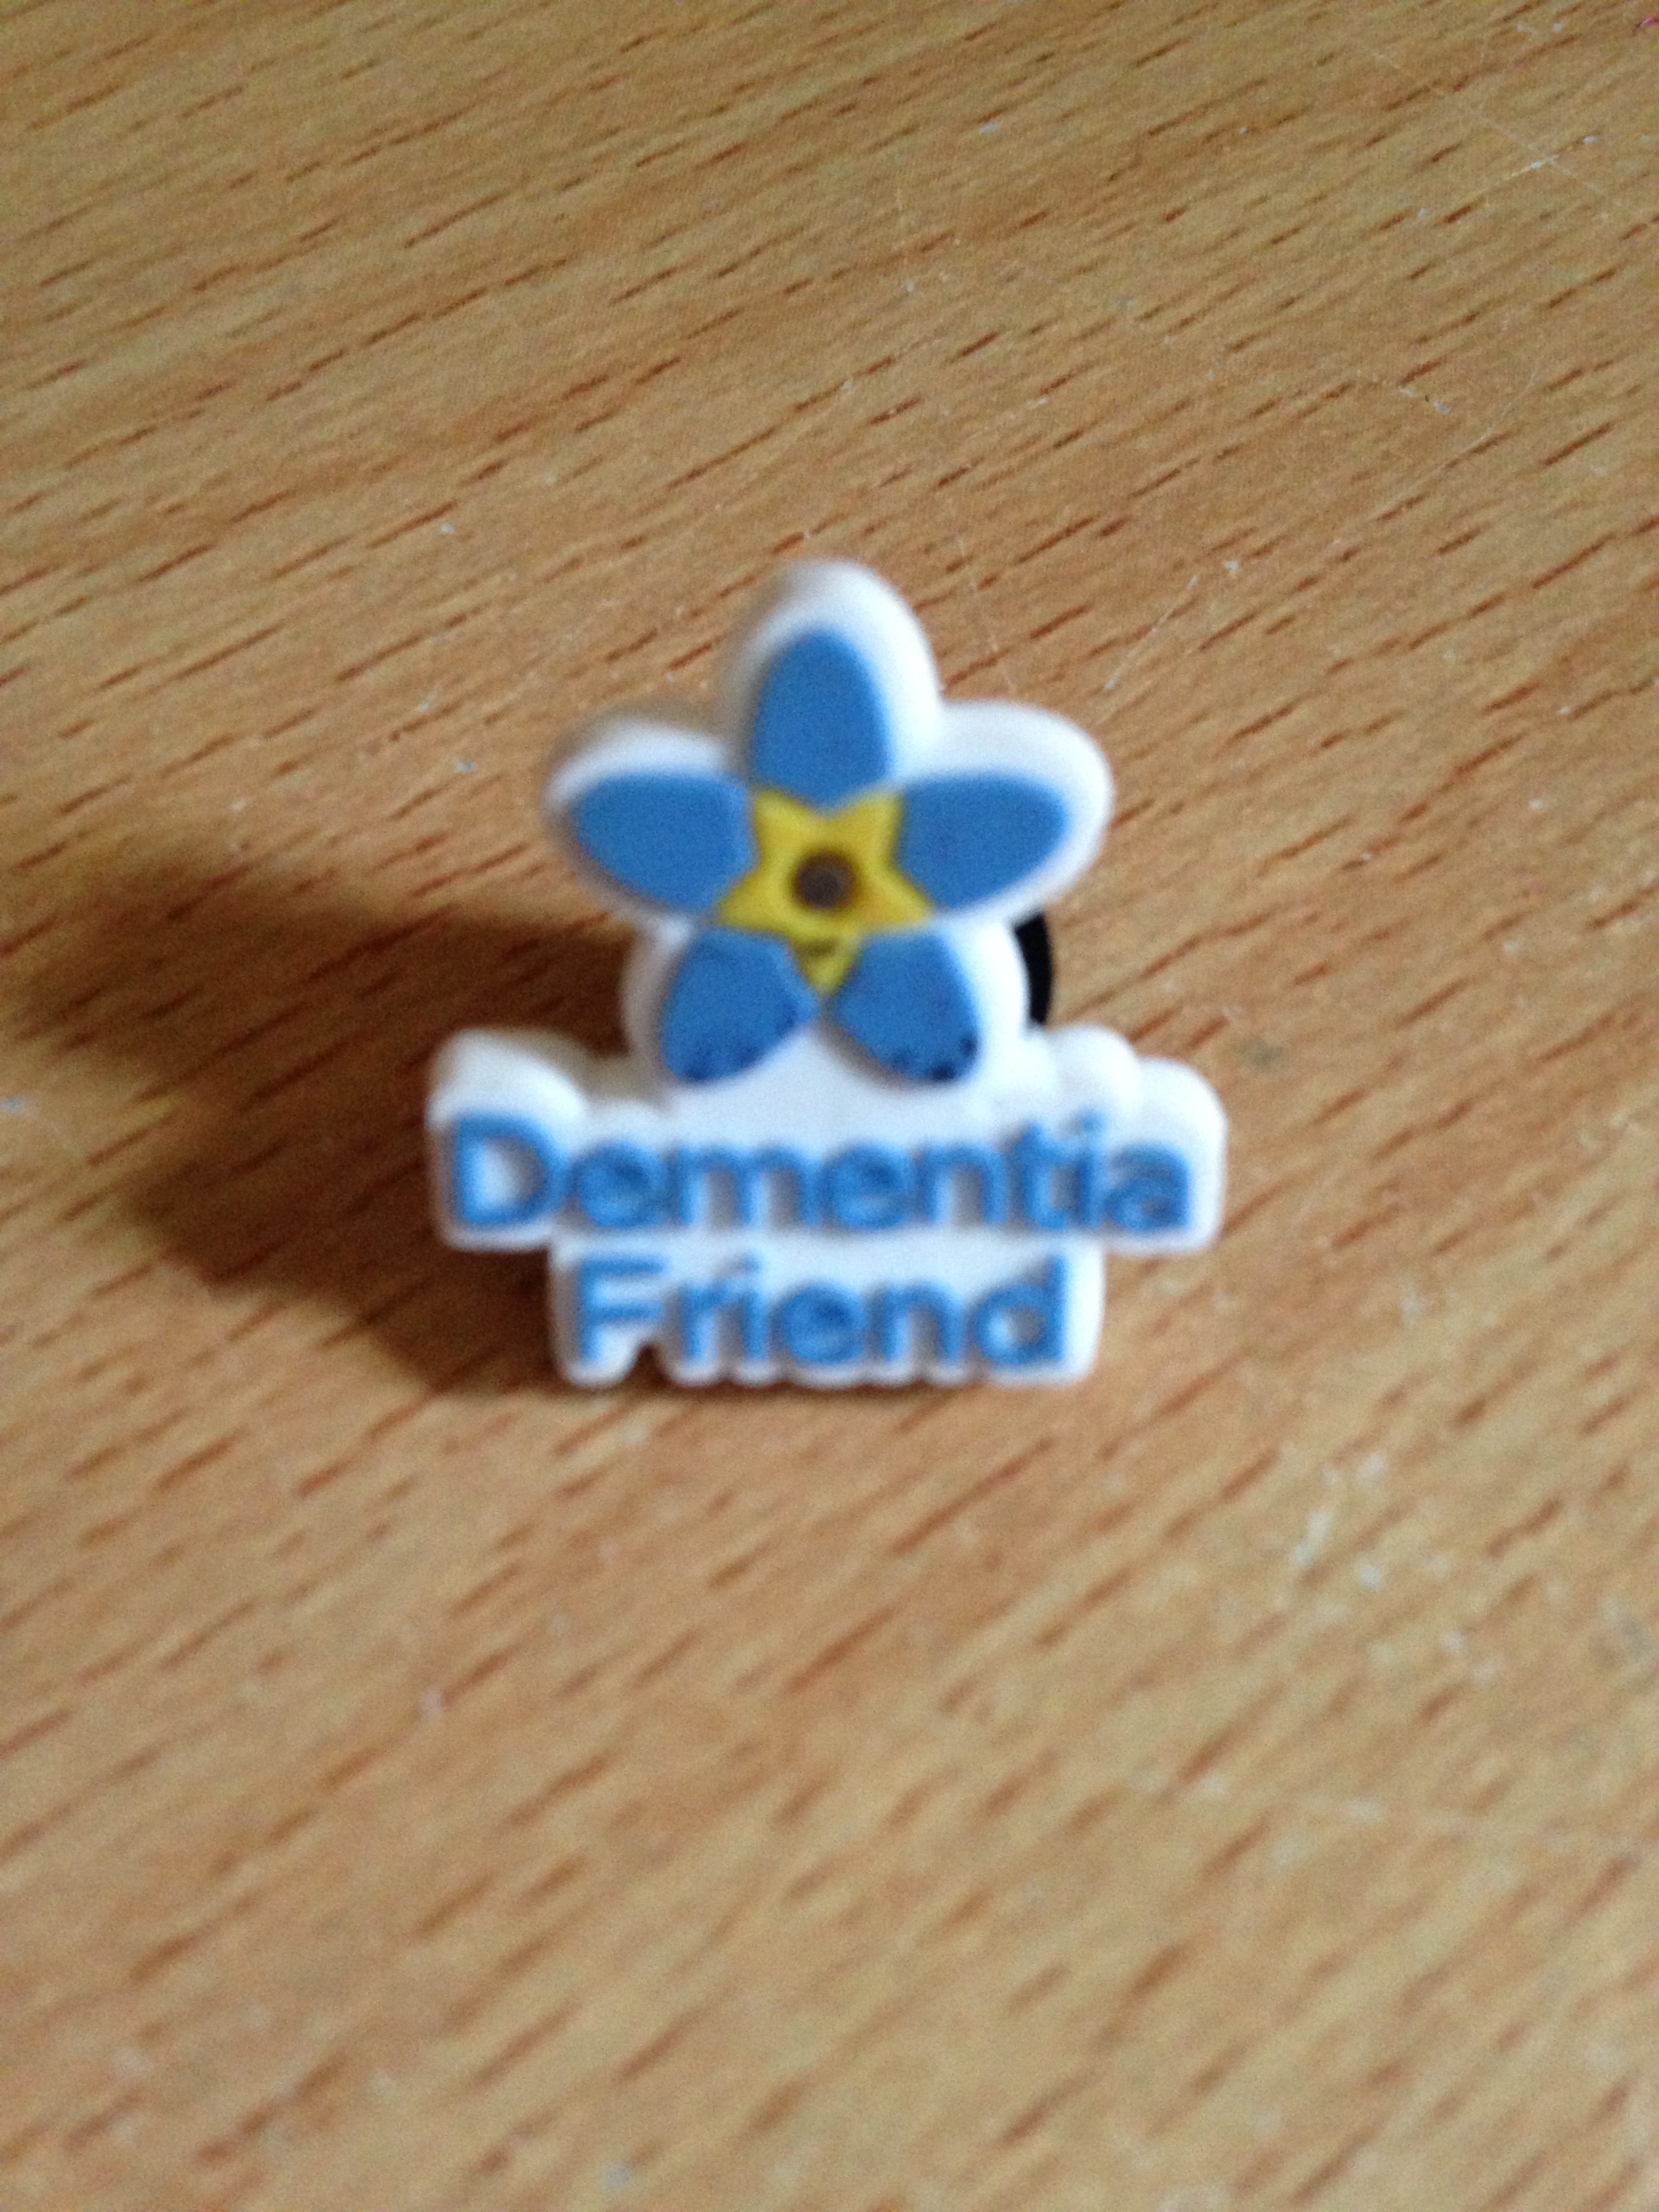 Last years pledge for NHS change day to create 100 more dementia friends smashed!! featured image